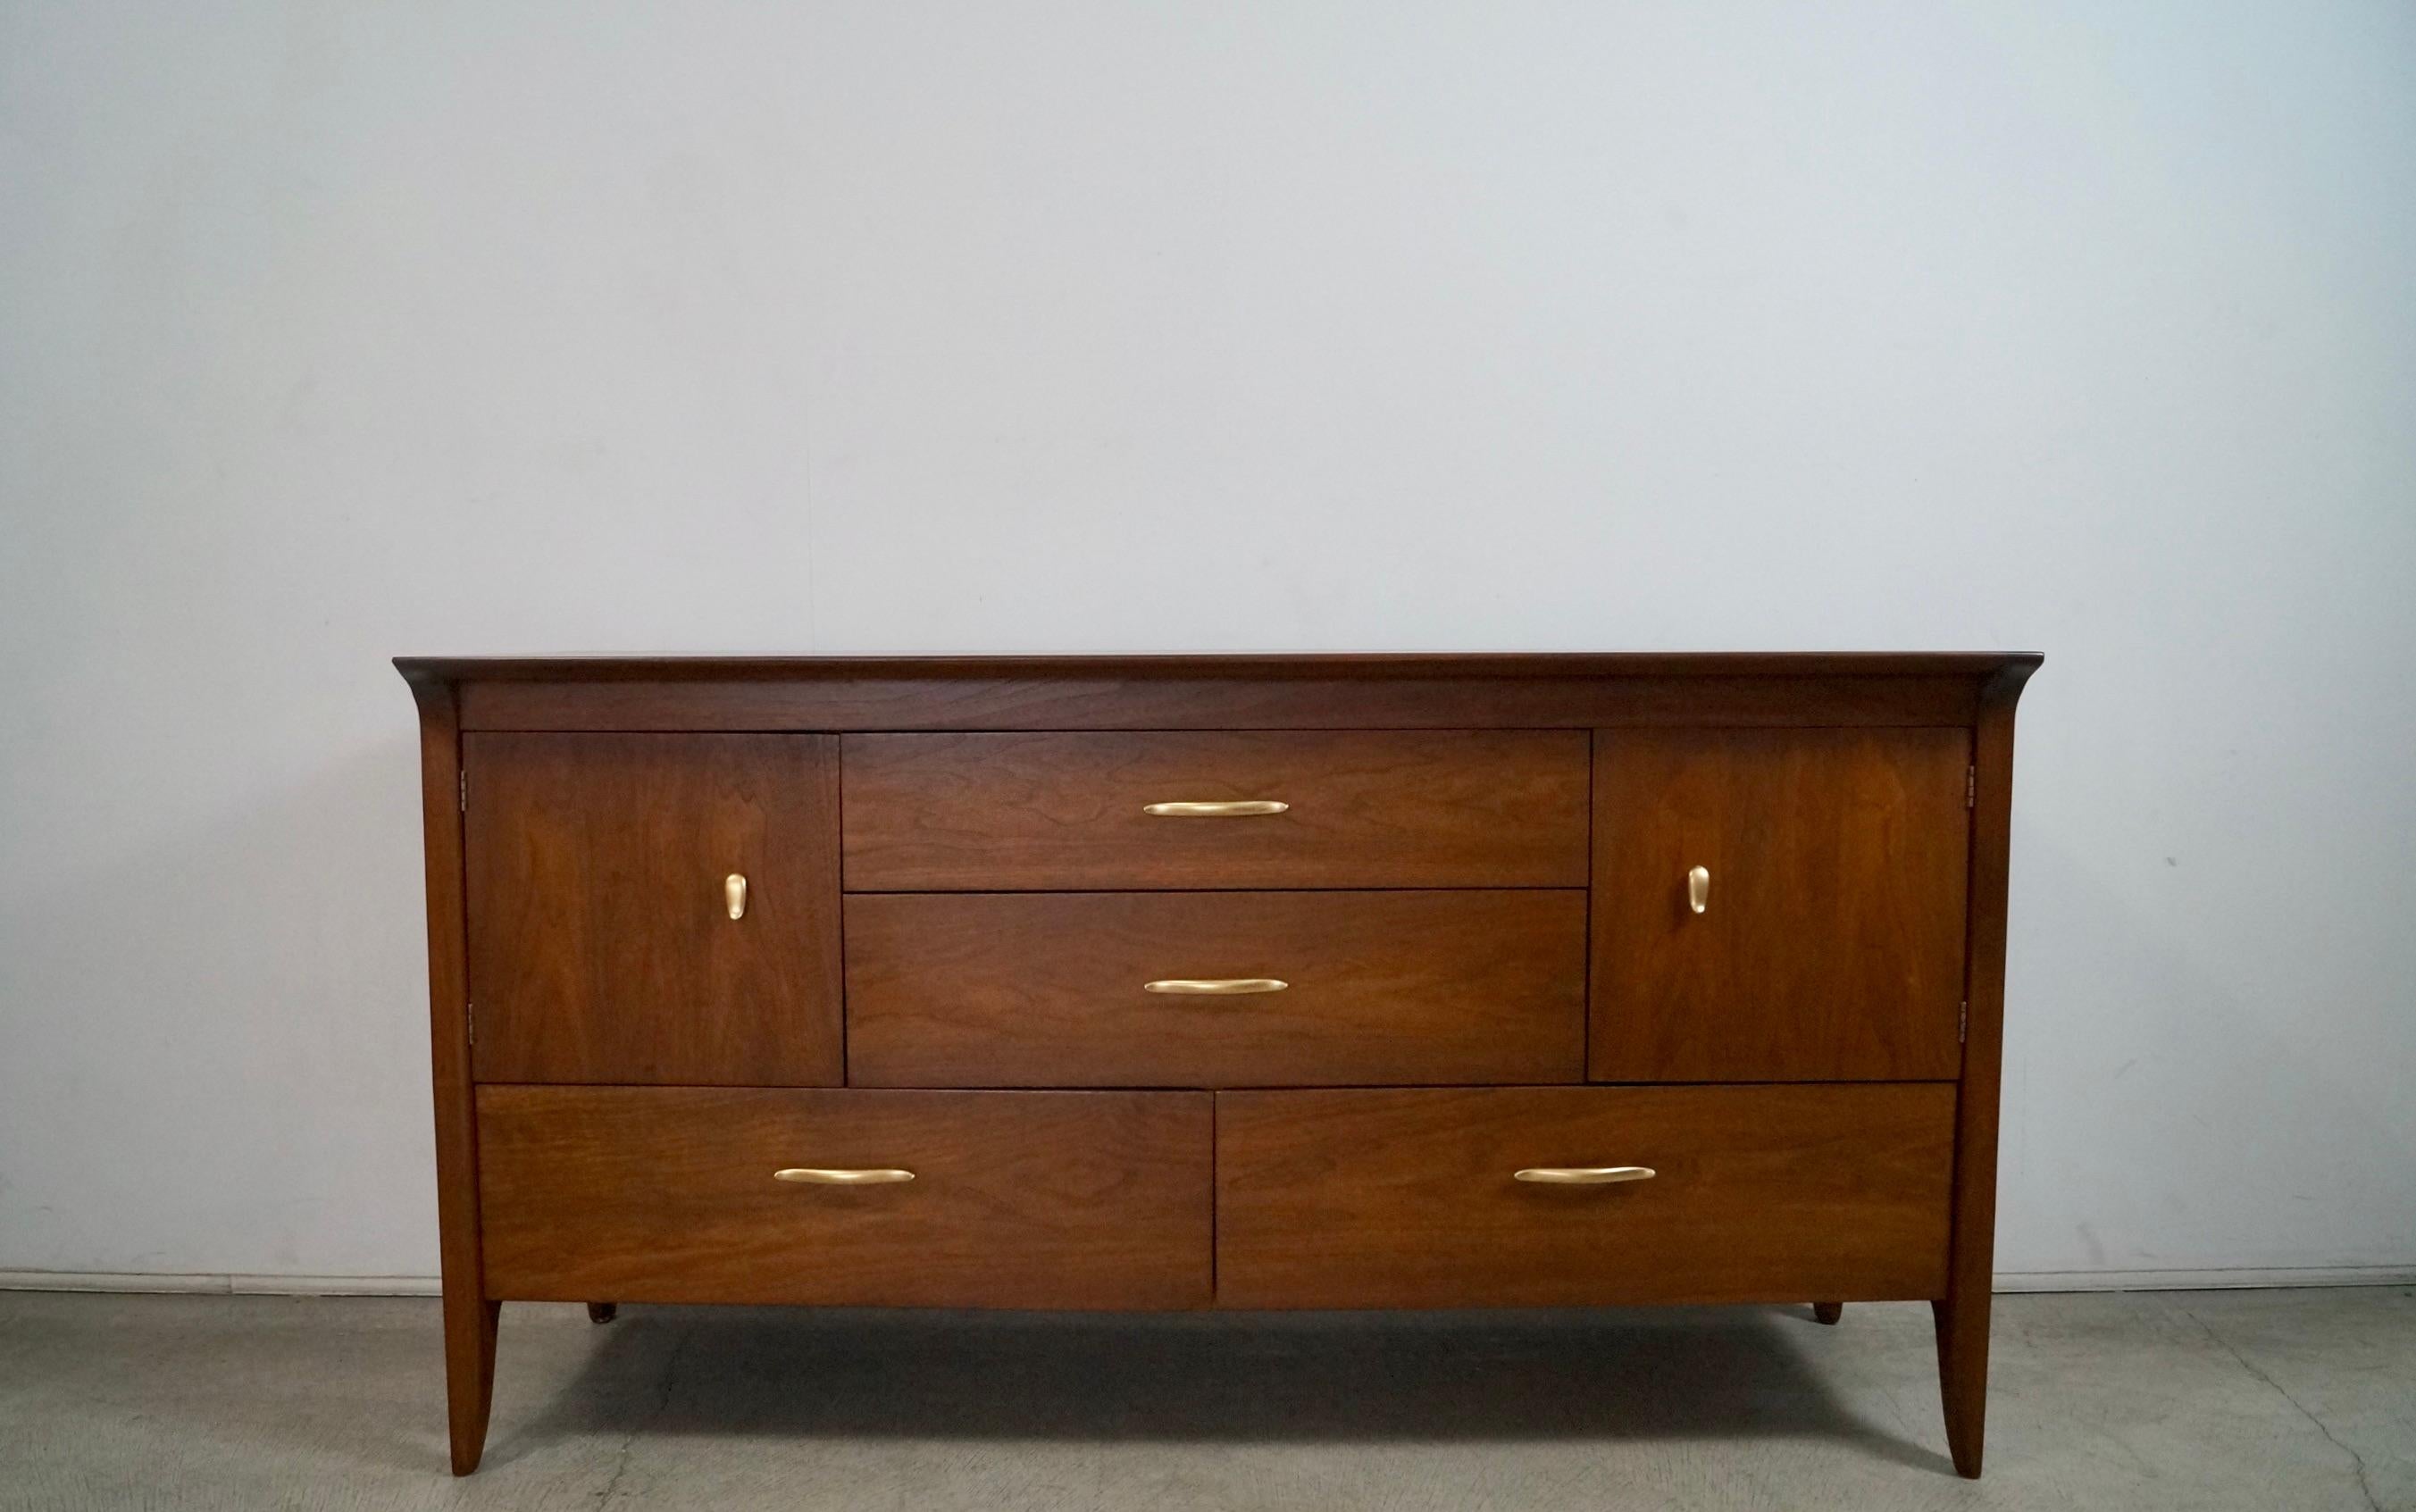 Vintage original Midcentury Modern credenza for sale. Designed by John Van Koert for Drexel in the 1950's, and part of the Profile series. Has been beautifully restored, and in wonderful restored condition. Has two cabinet doors that open up to a